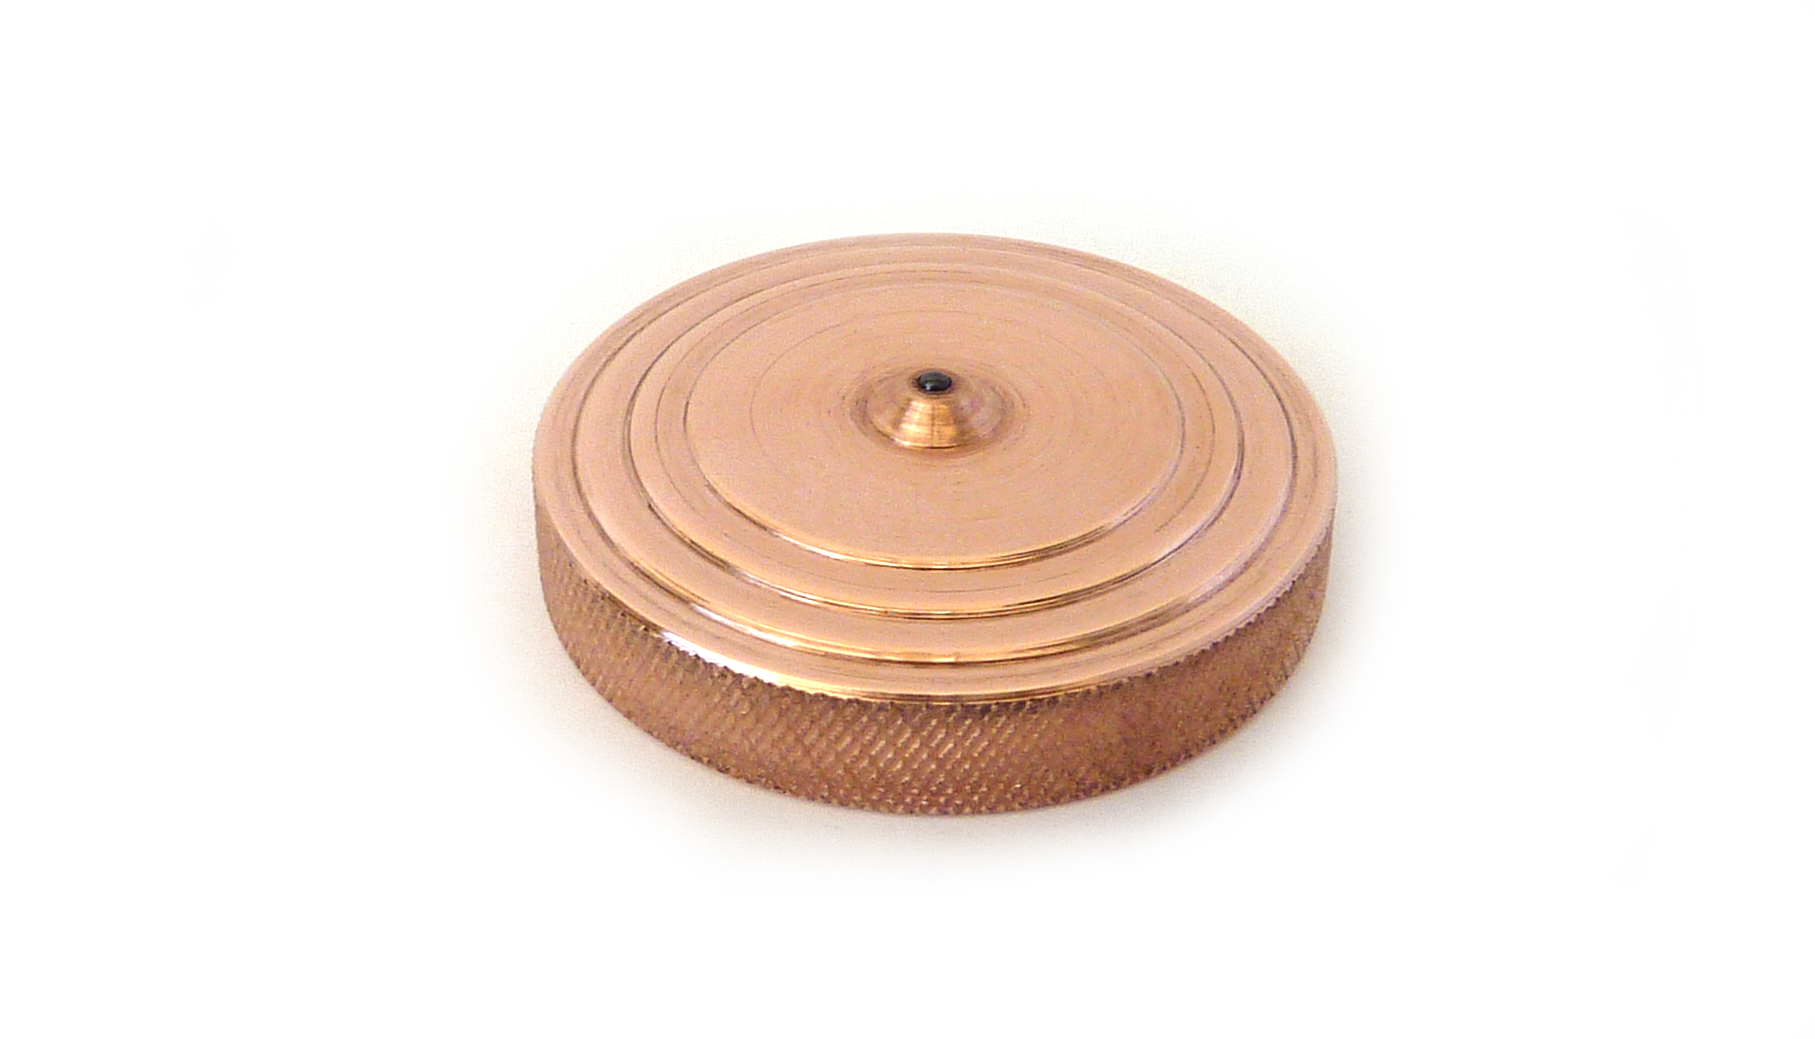 The FlatTop - Copper New Zealand EDC Spinning Top